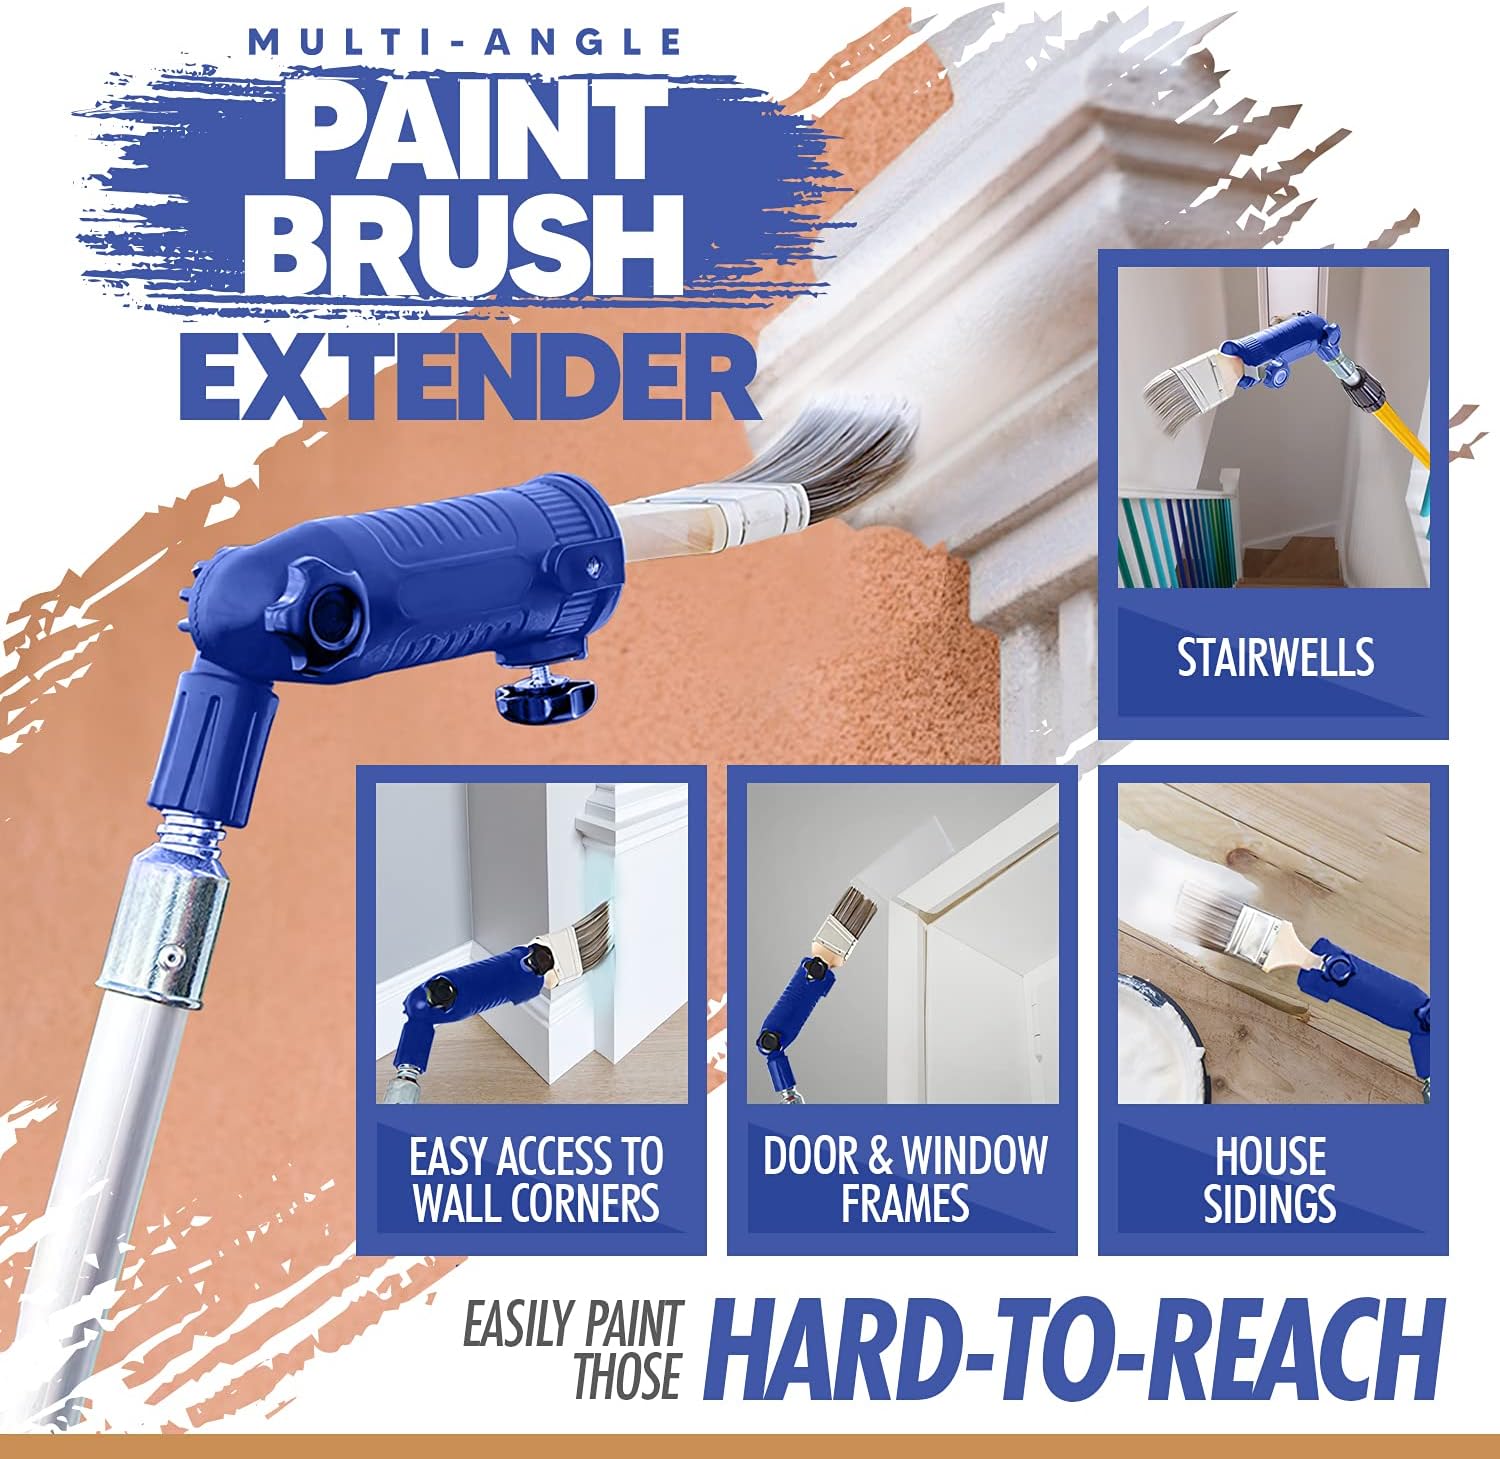 Paint Contractor Life Paint&#194;&#160;Contractor Life Multi-Angle Paint Brush Extender - Paint Edger Tool for Walls, High Ceilings, Trim and